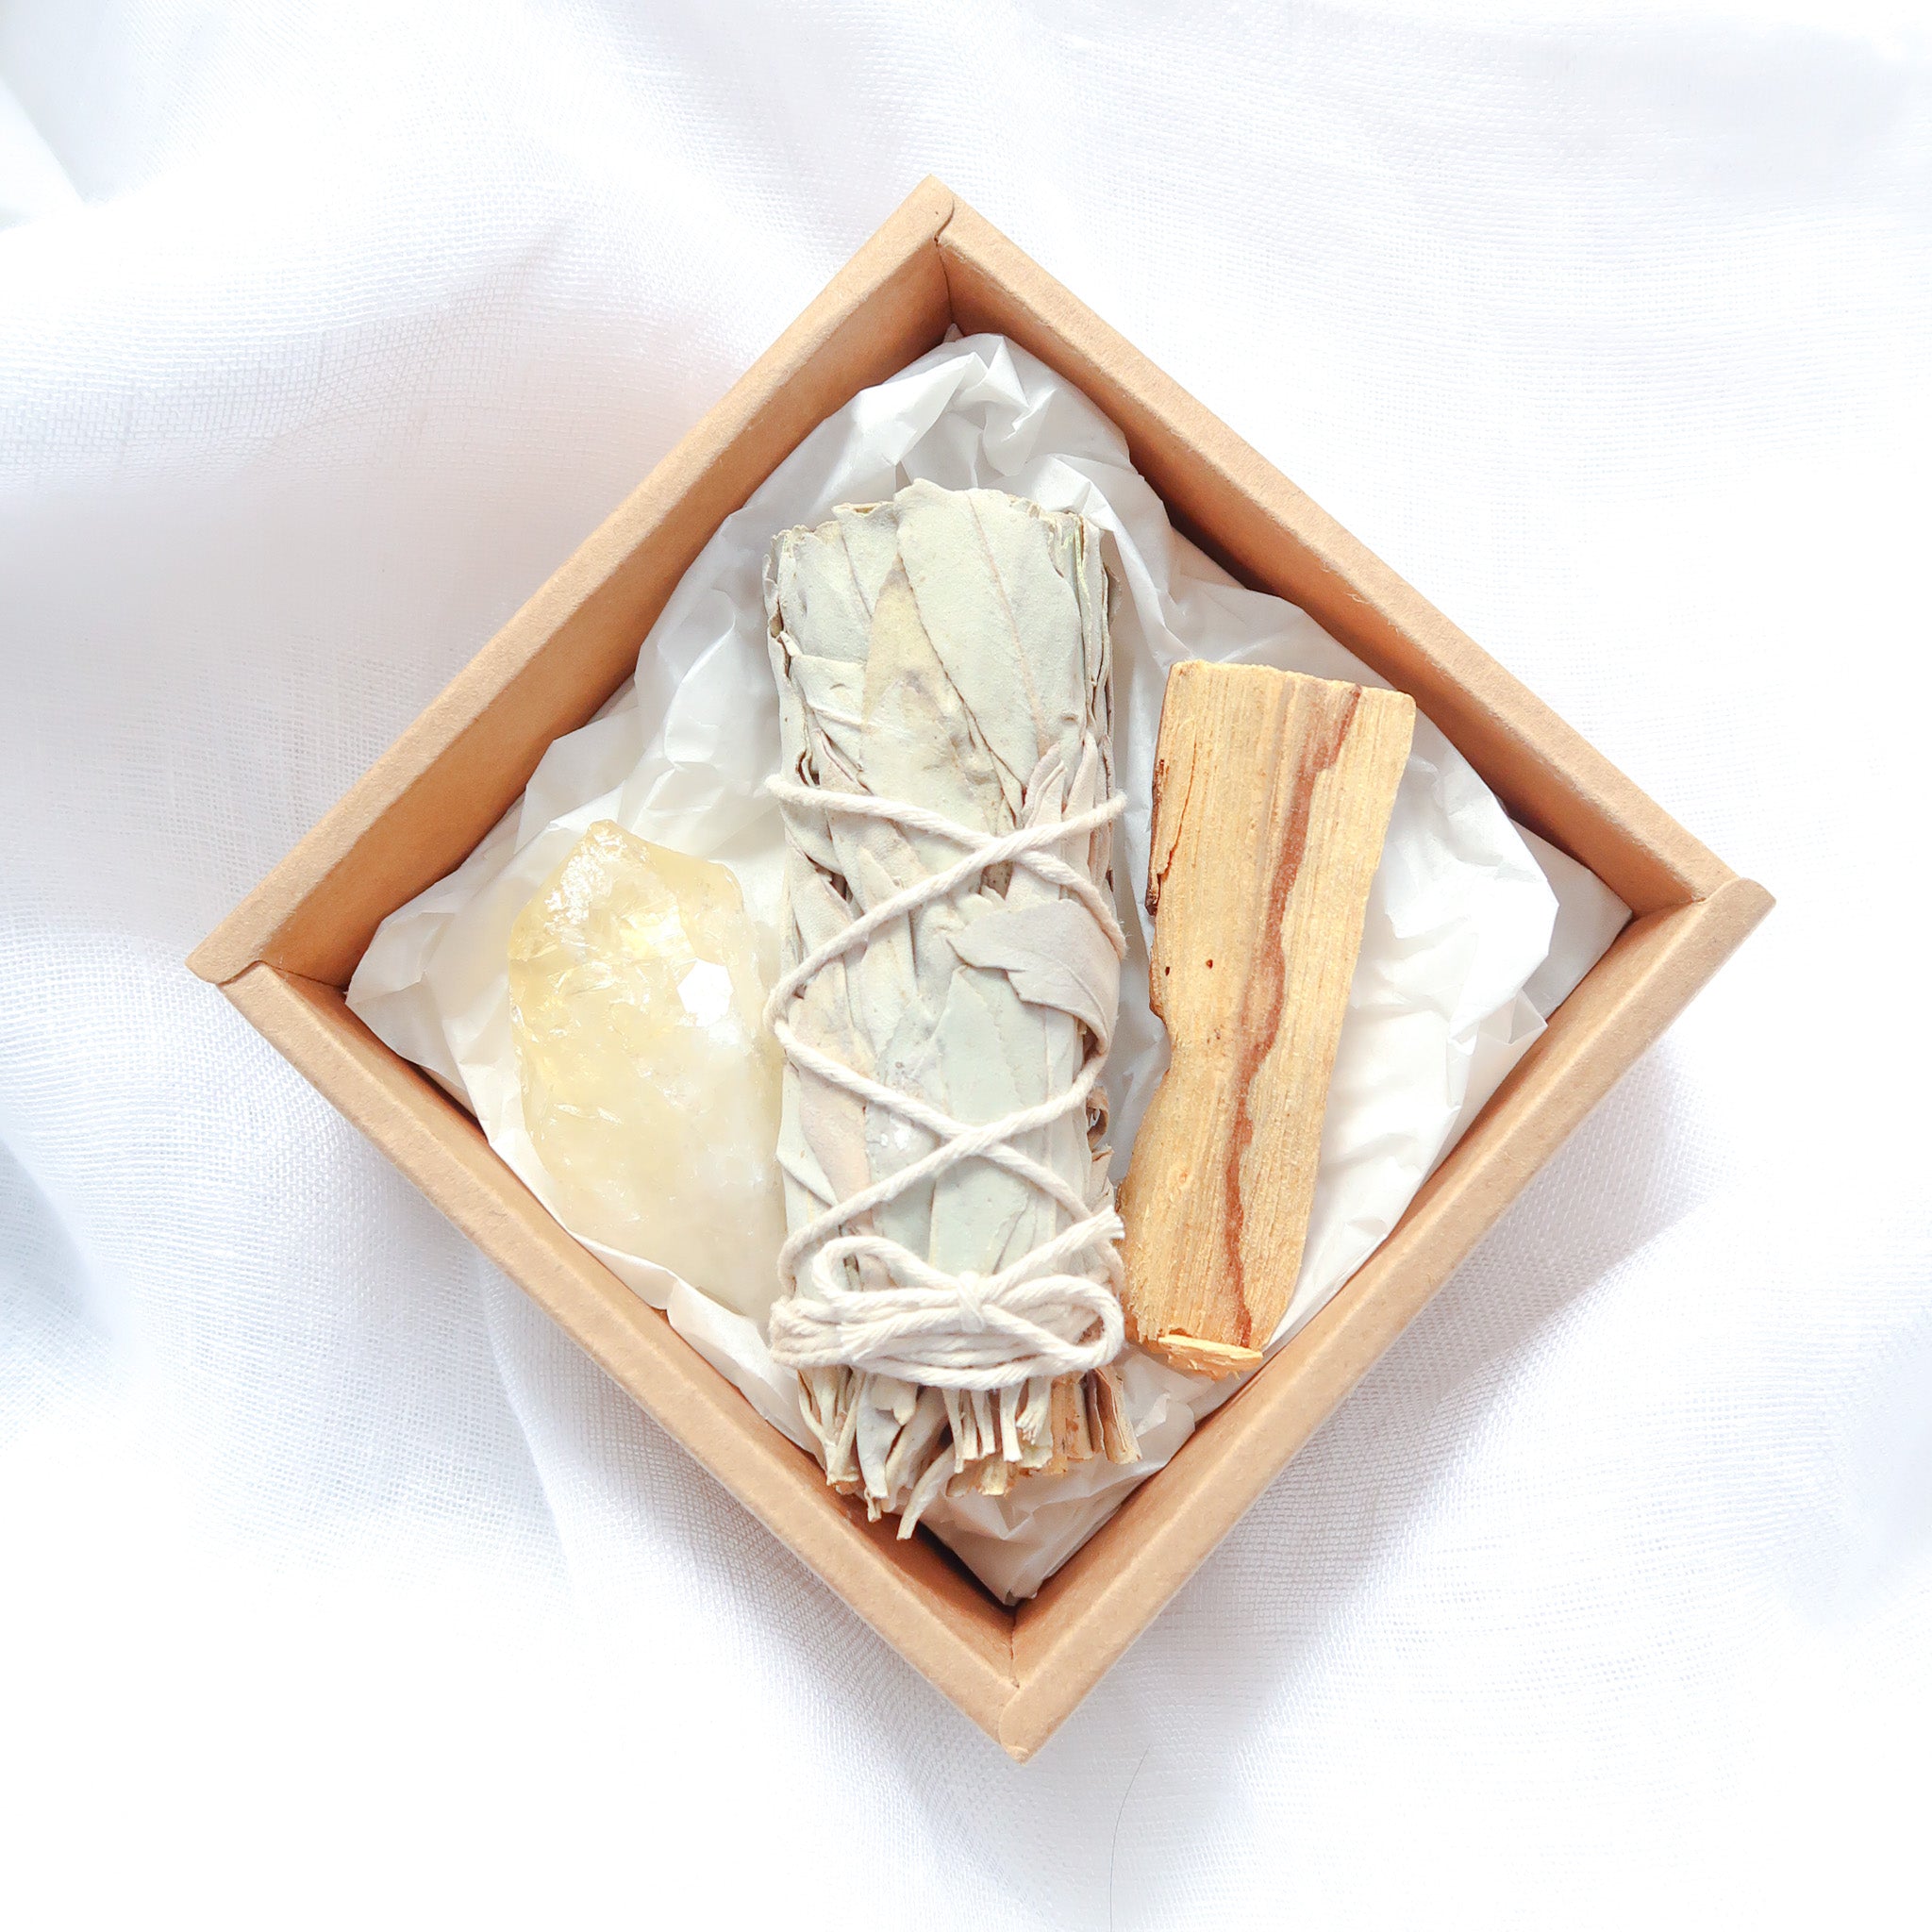 The Little Cleansing Crystal Box